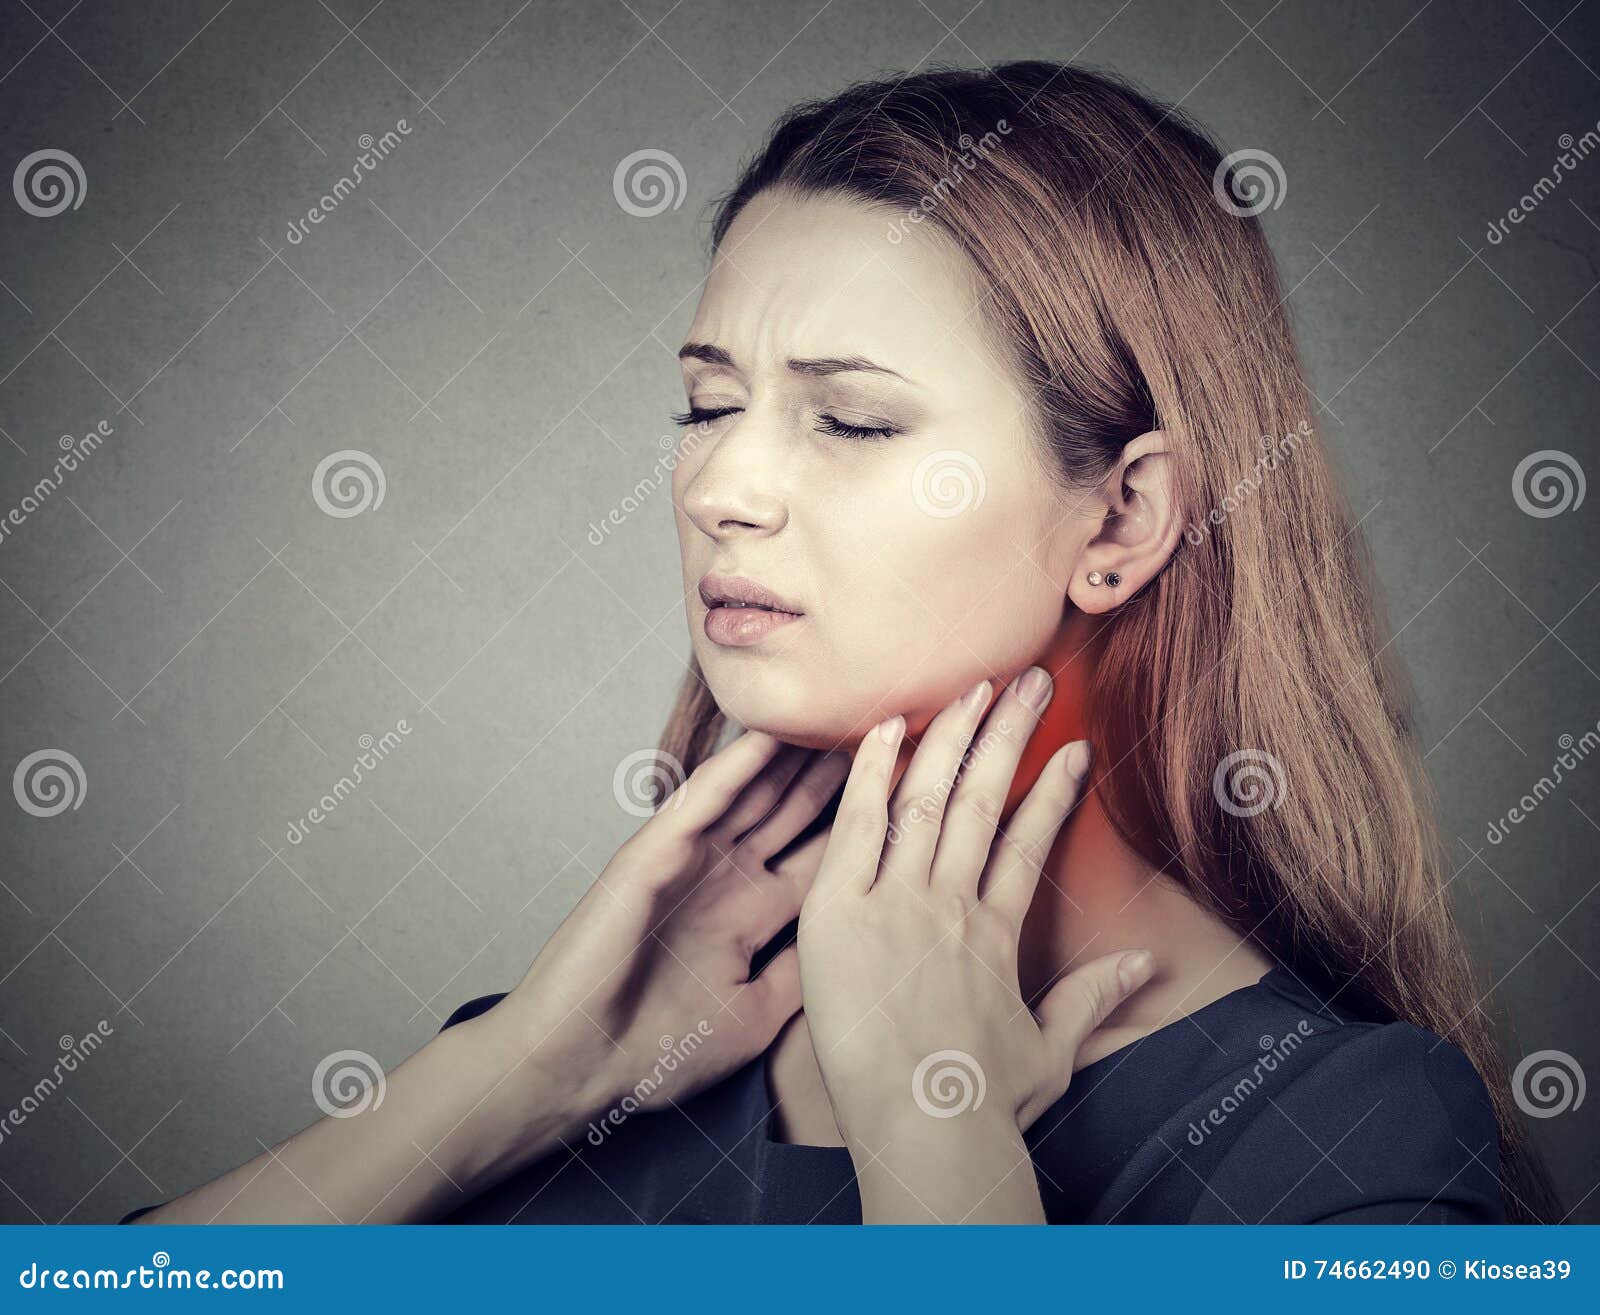 girl with sore throat neck colored in red. sick woman having pain in throat